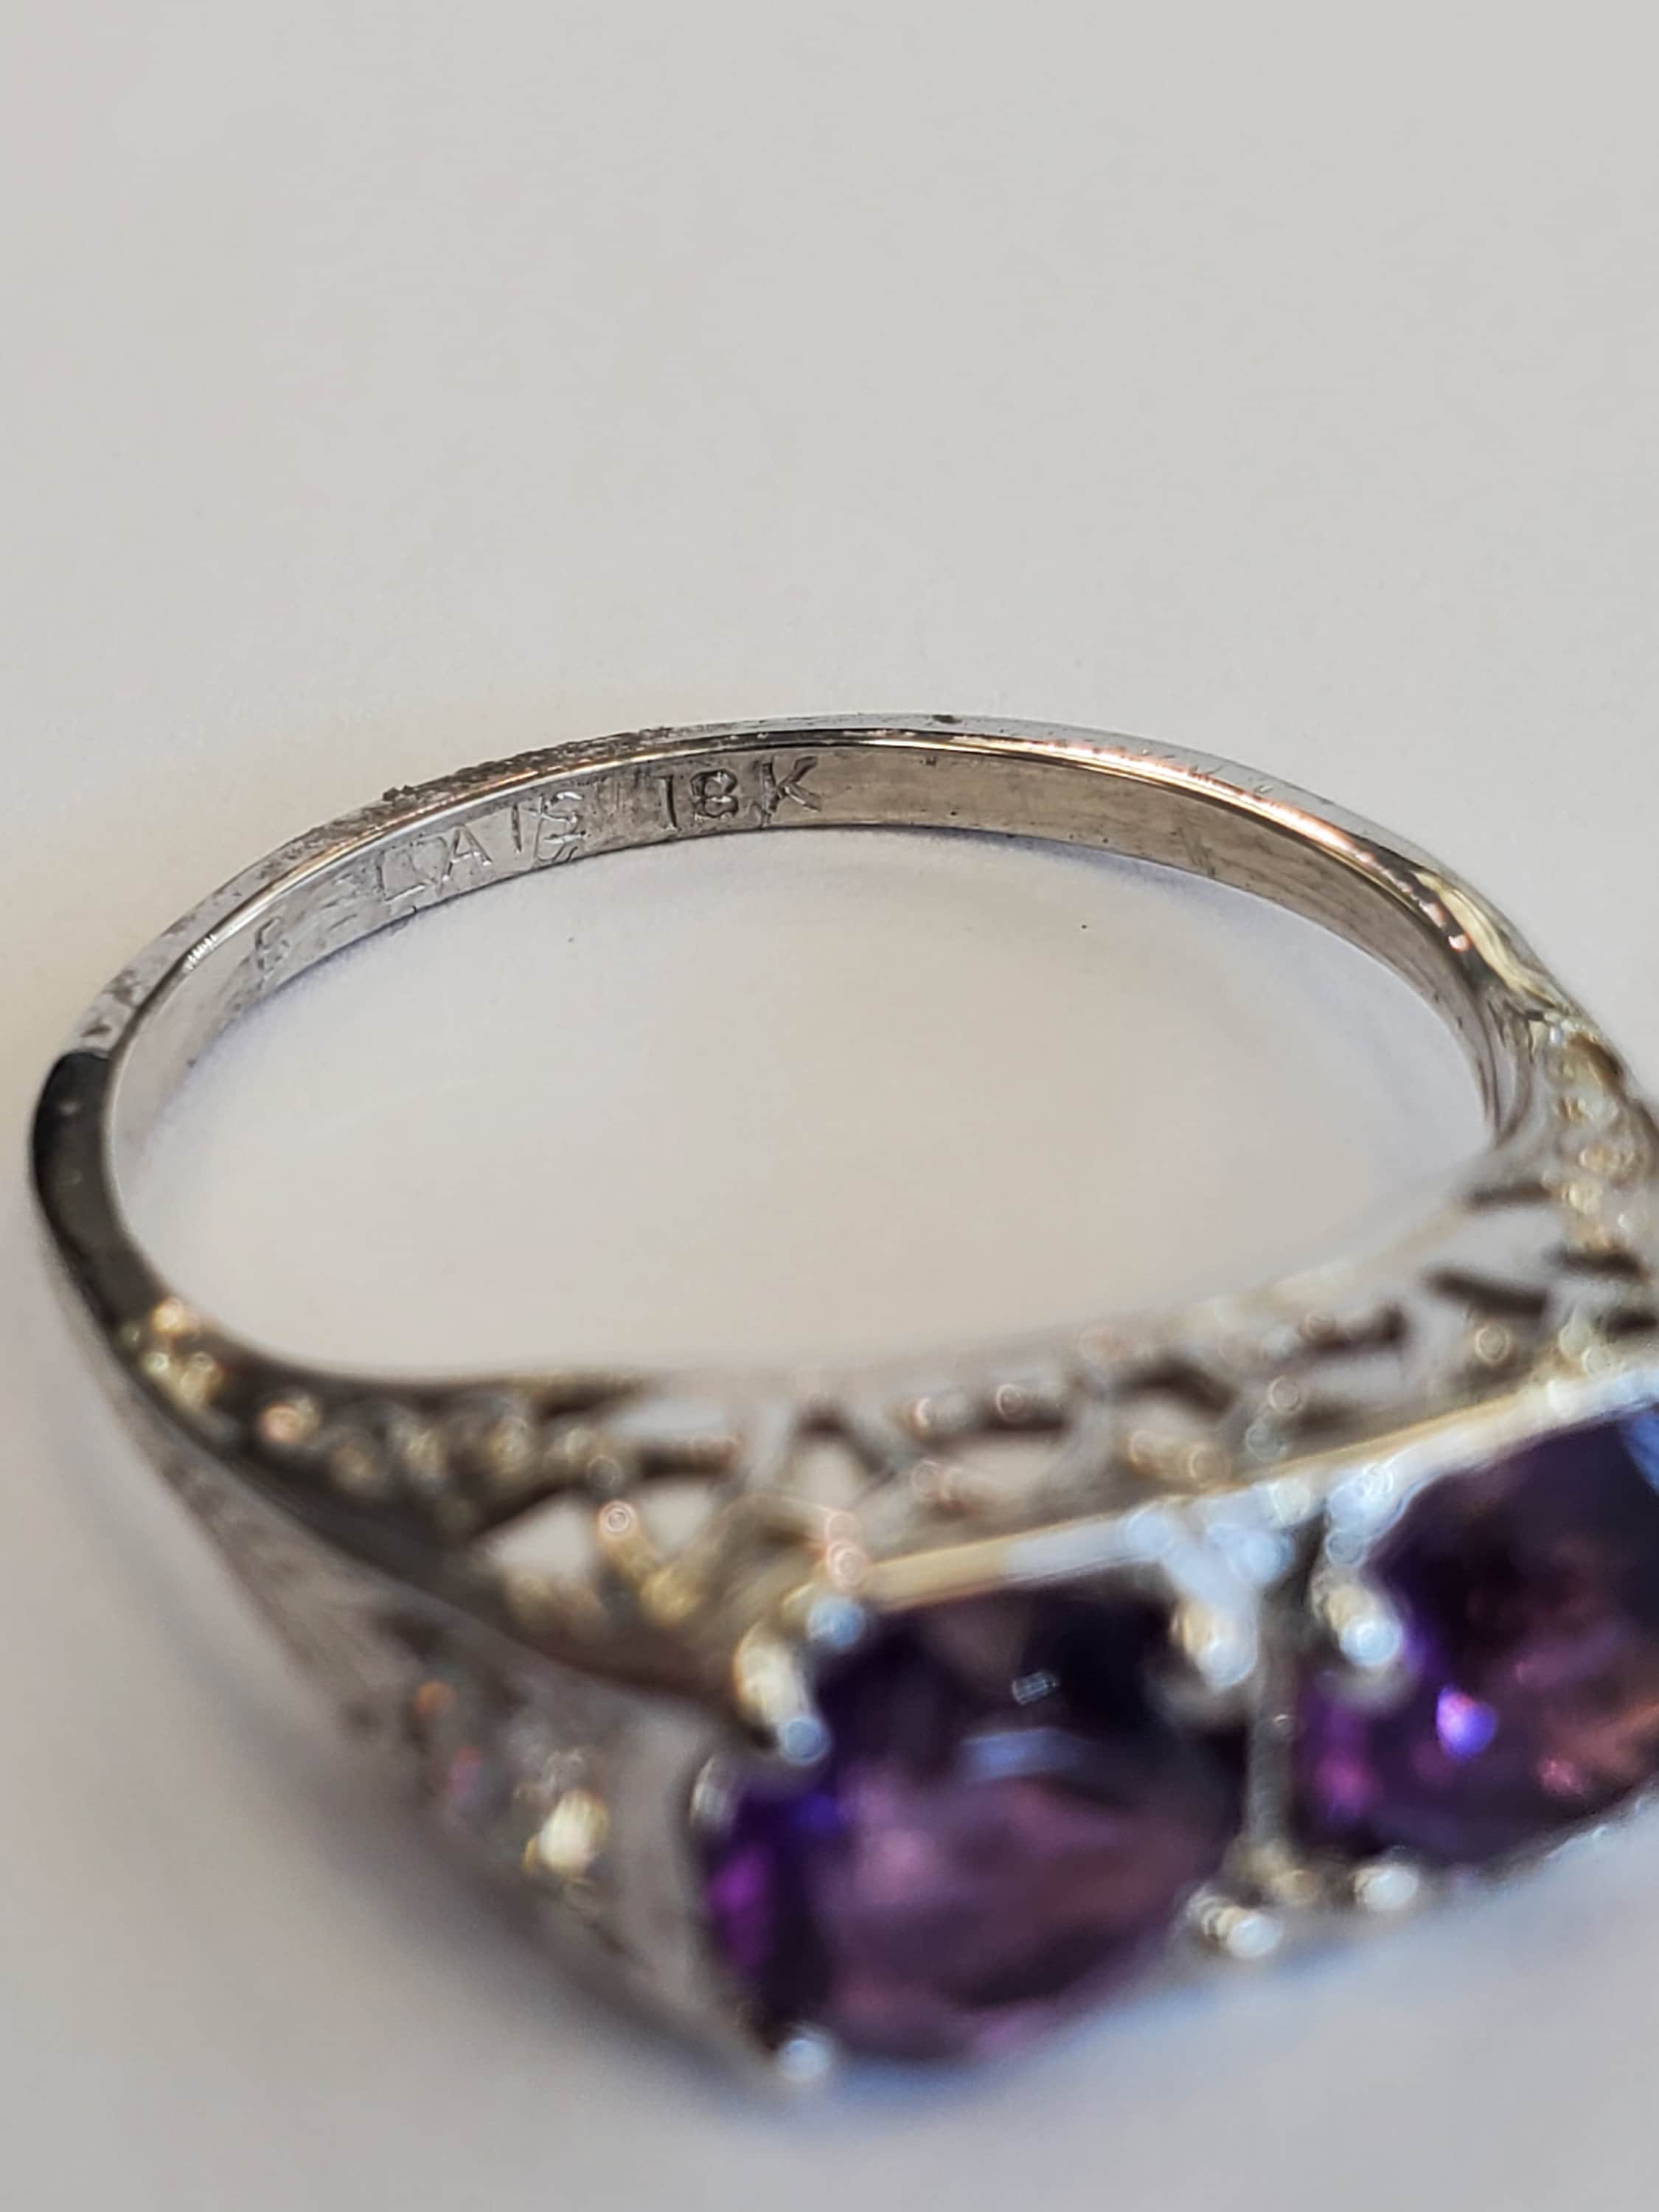 Product Image for 18k white gold amethyst and diamond filigree ring size 8